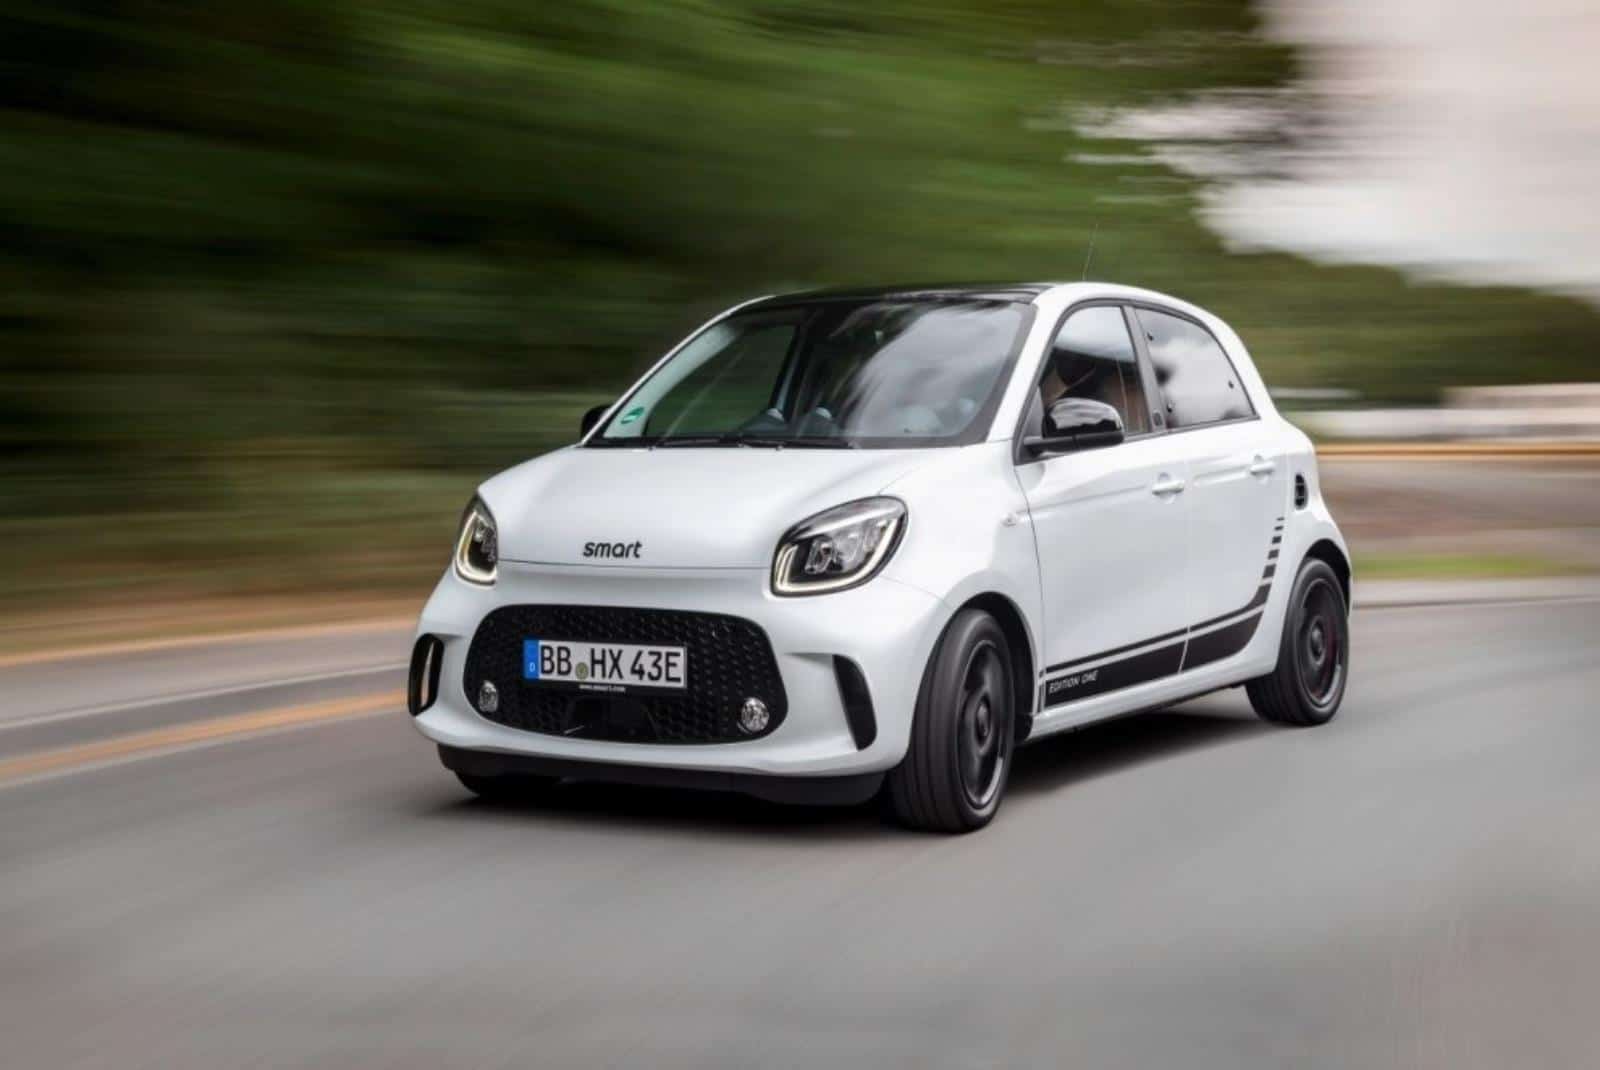 End of production of the affordable Smart EQ ForFour electric car